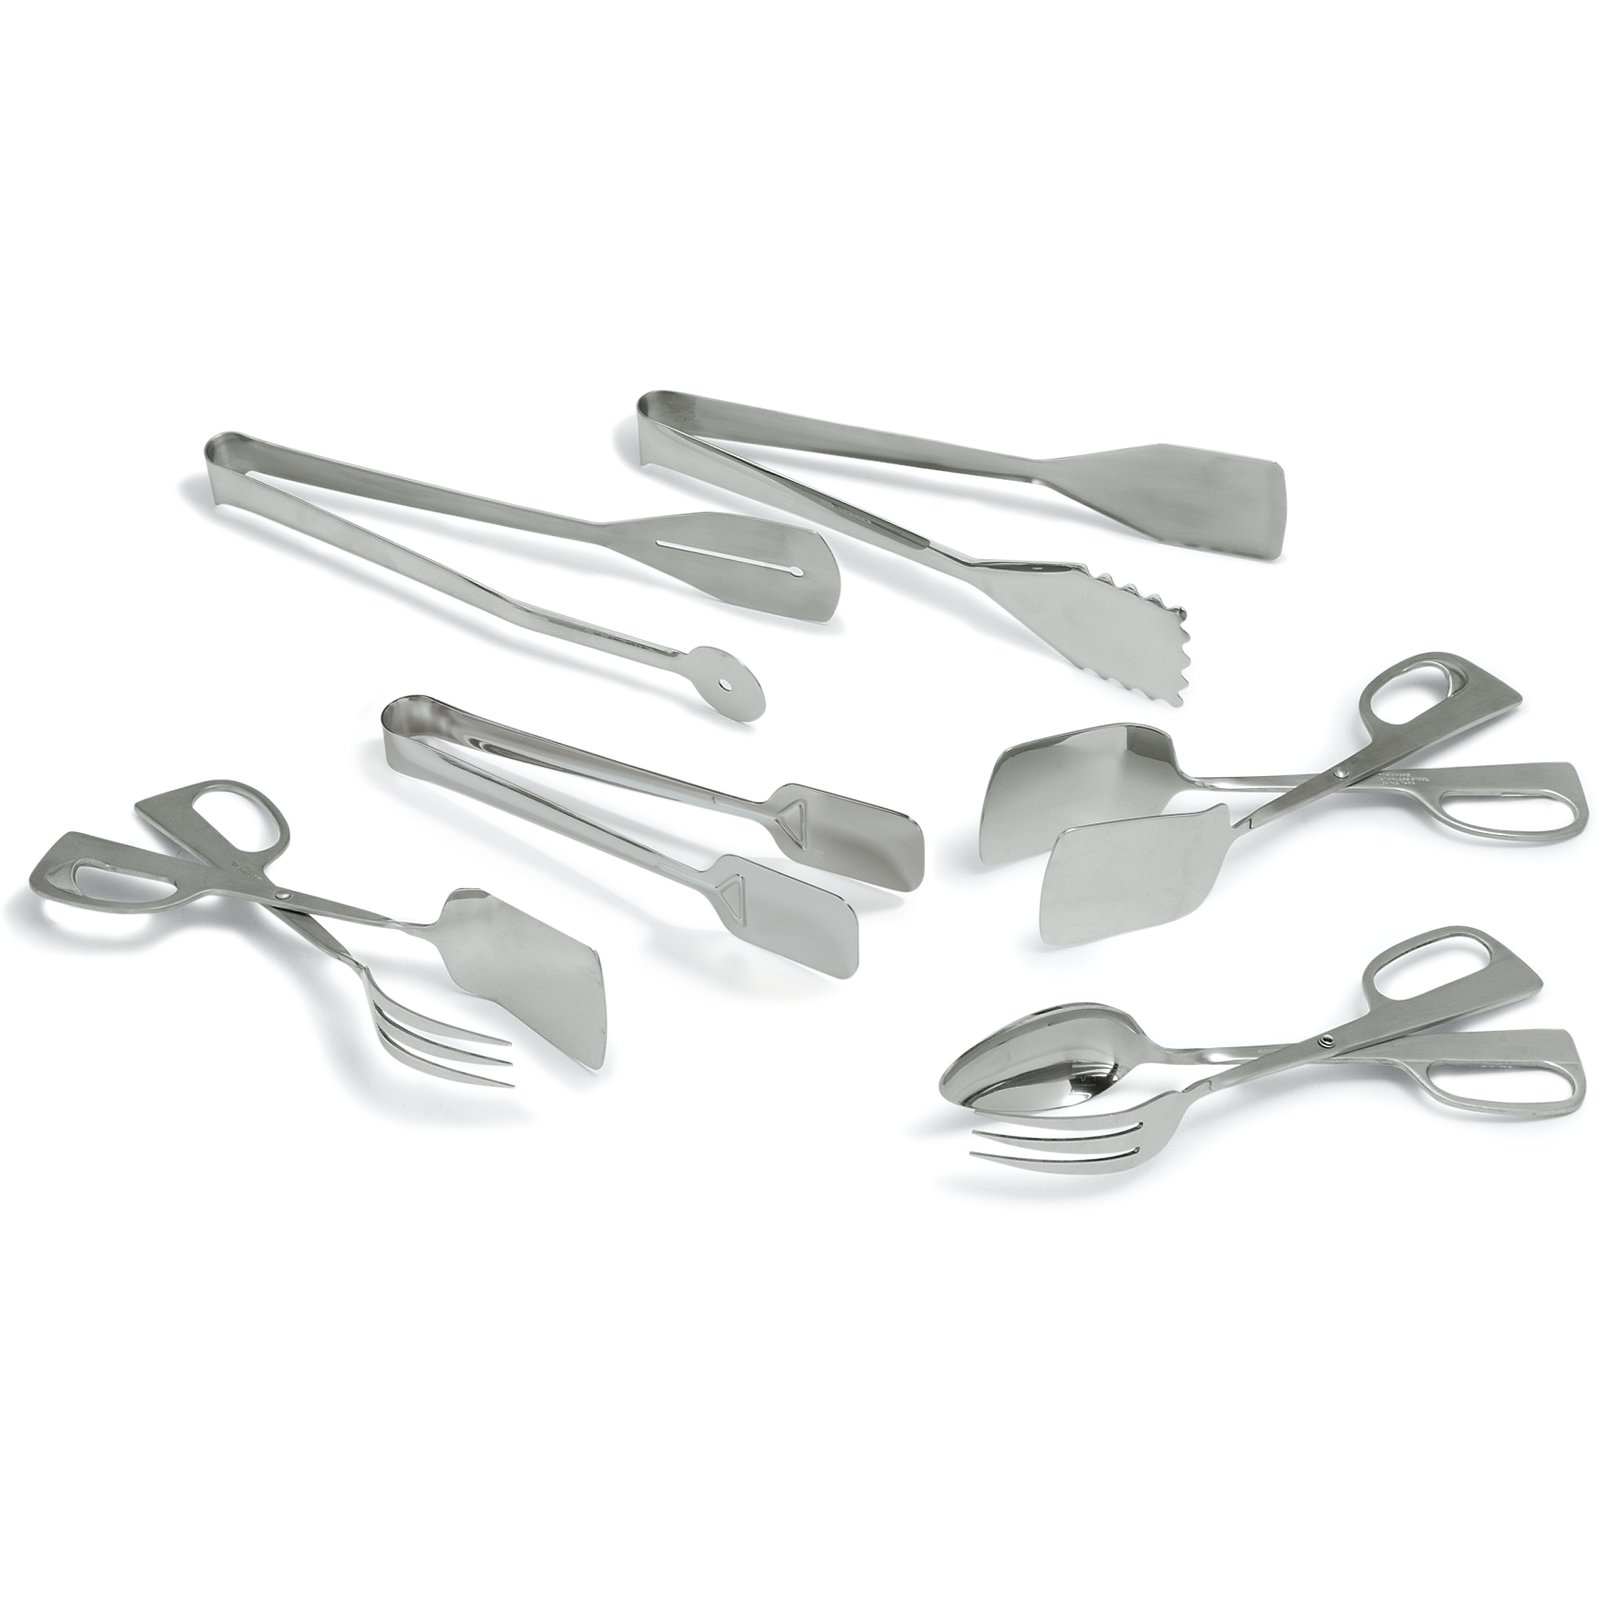 HUBERT® Stainless Steel Scalloped Hinged Tong - 9 1/2L